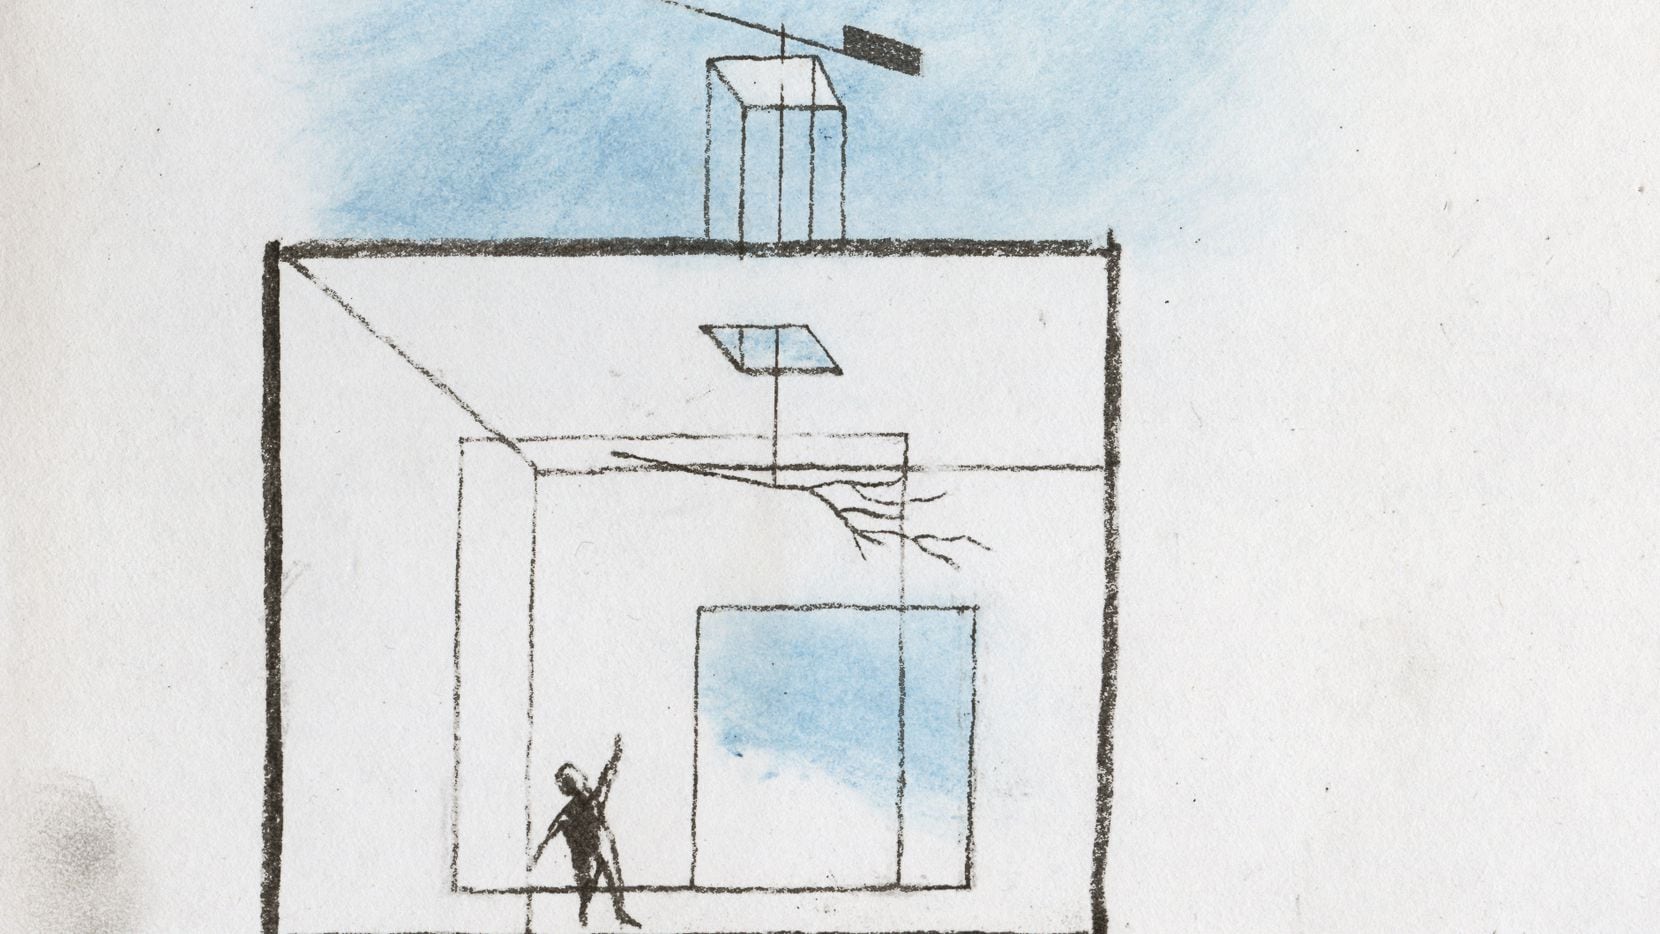 Dallas architect Max Levy sketched these drawings for an imaginary refuge in nature for the...